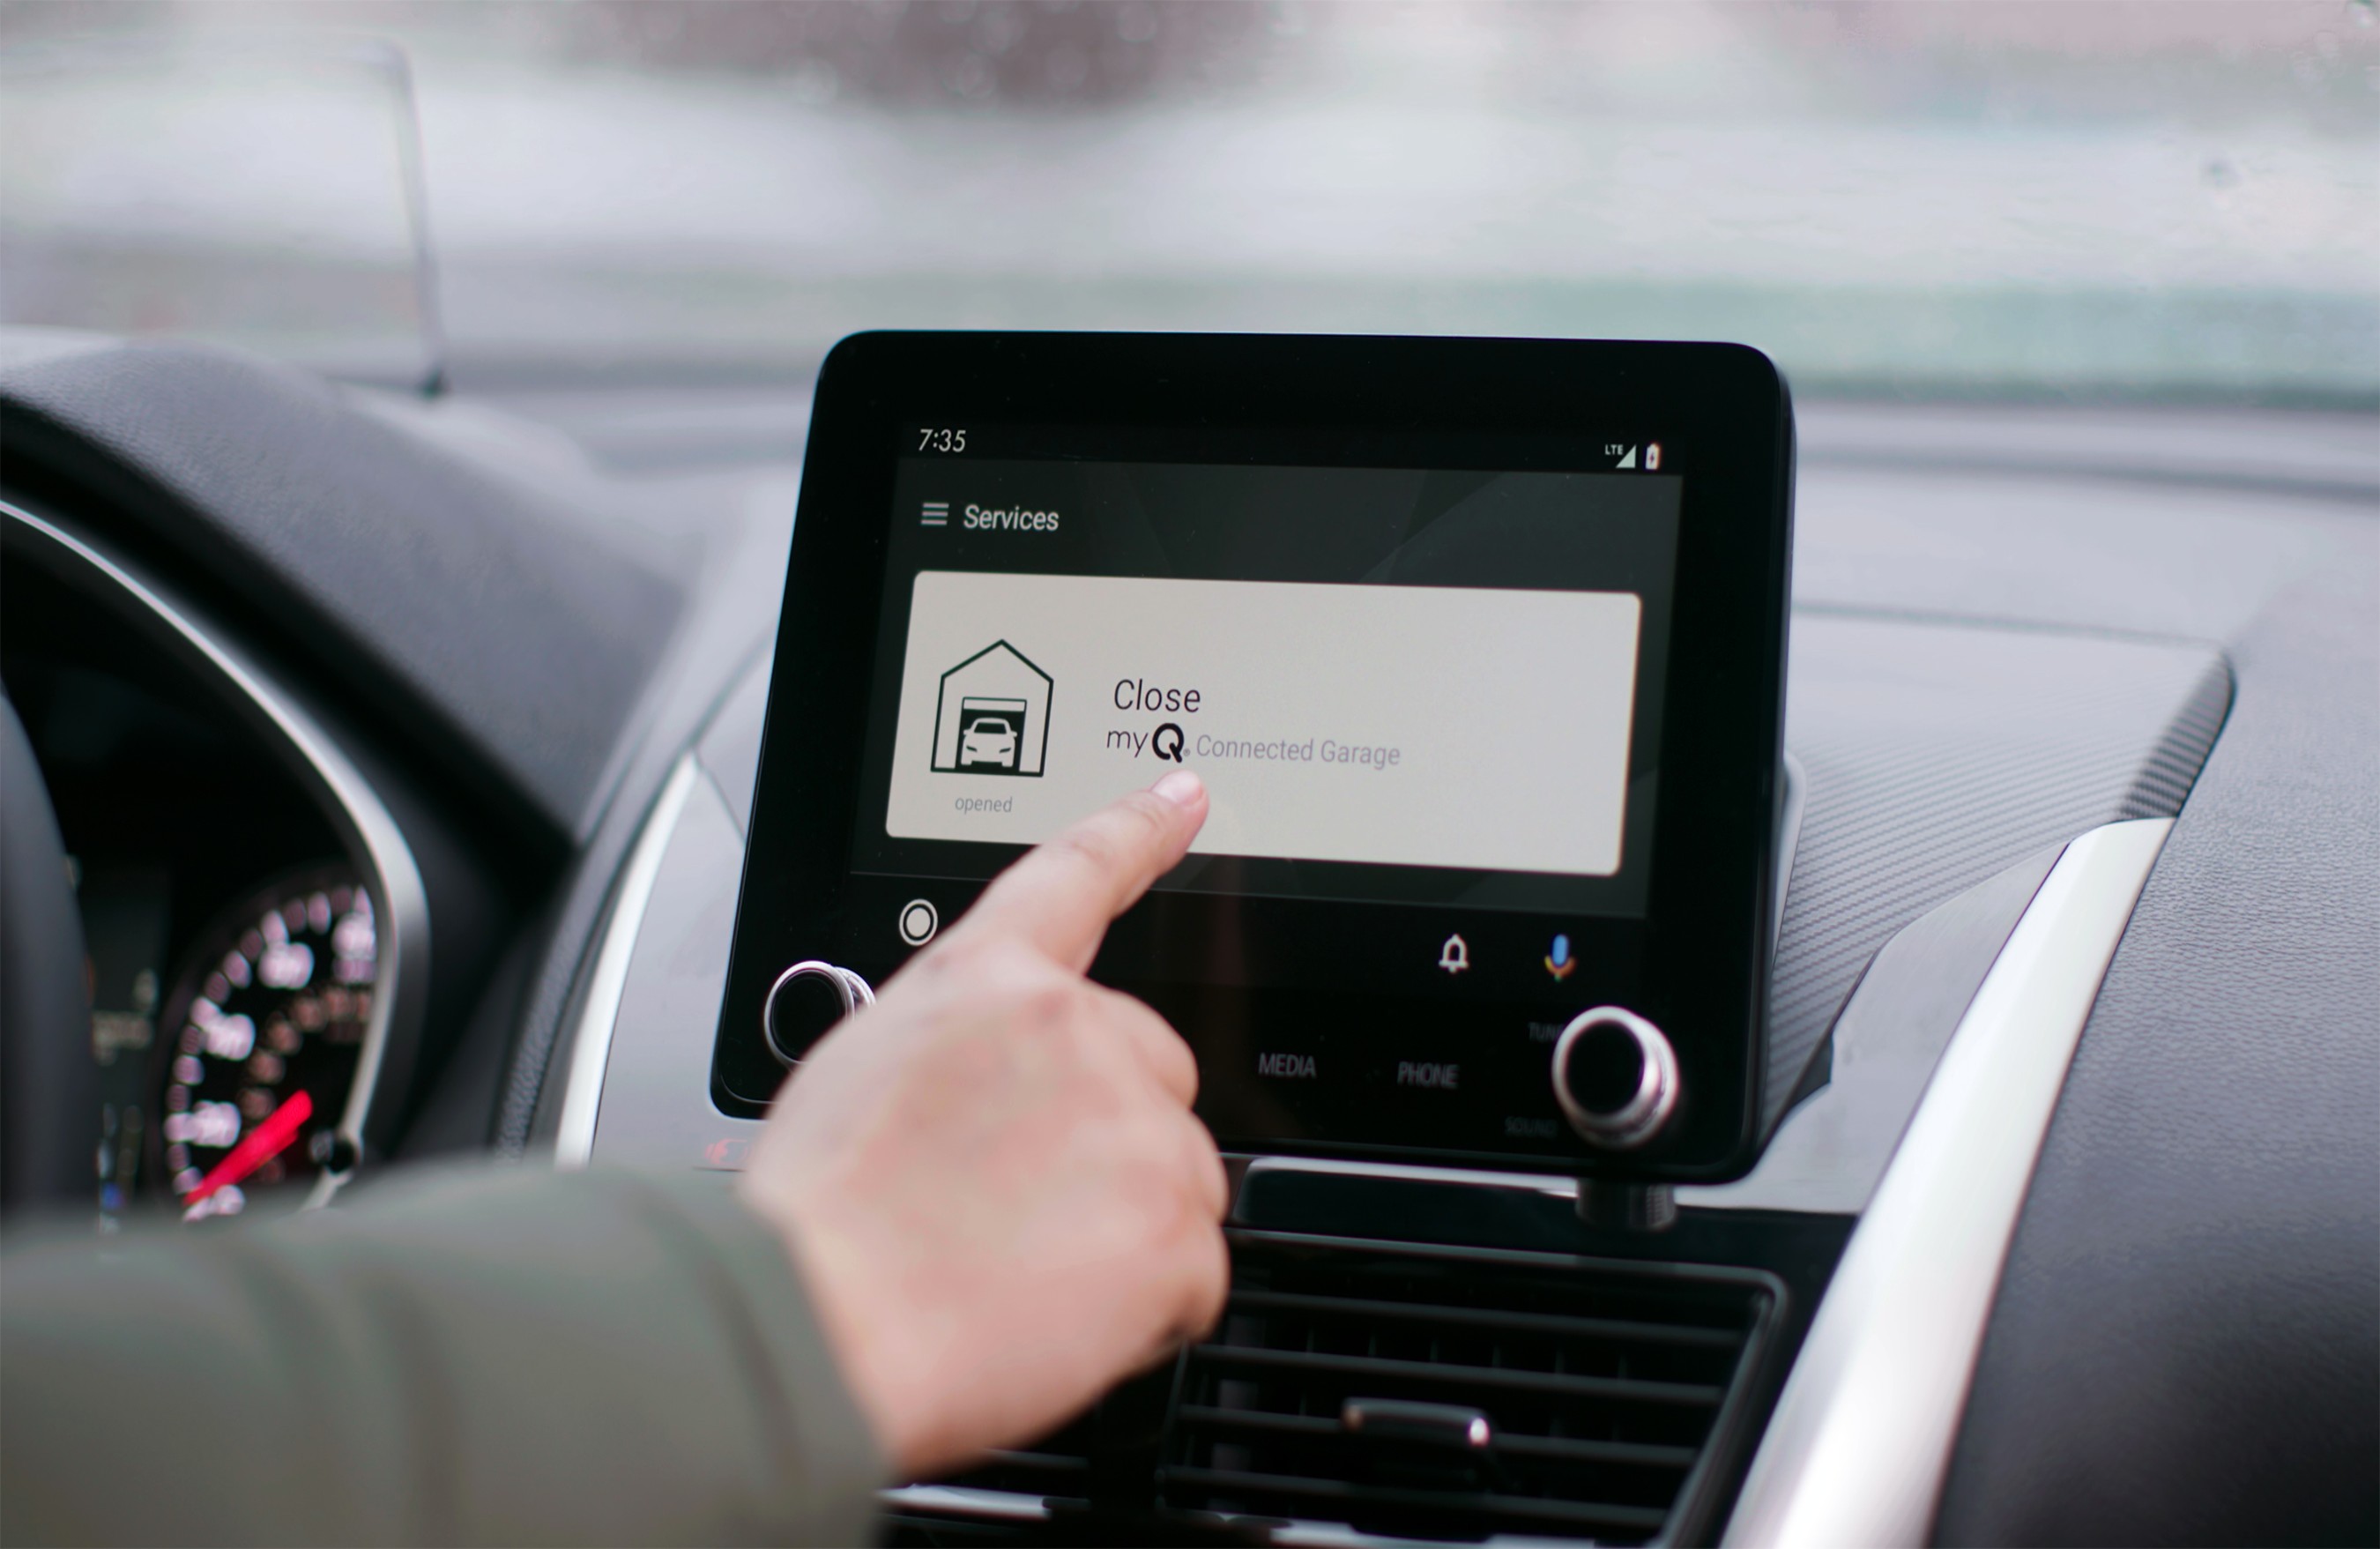 Safely open and close your garage door from anywhere with convenient in-dash touchscreen control.